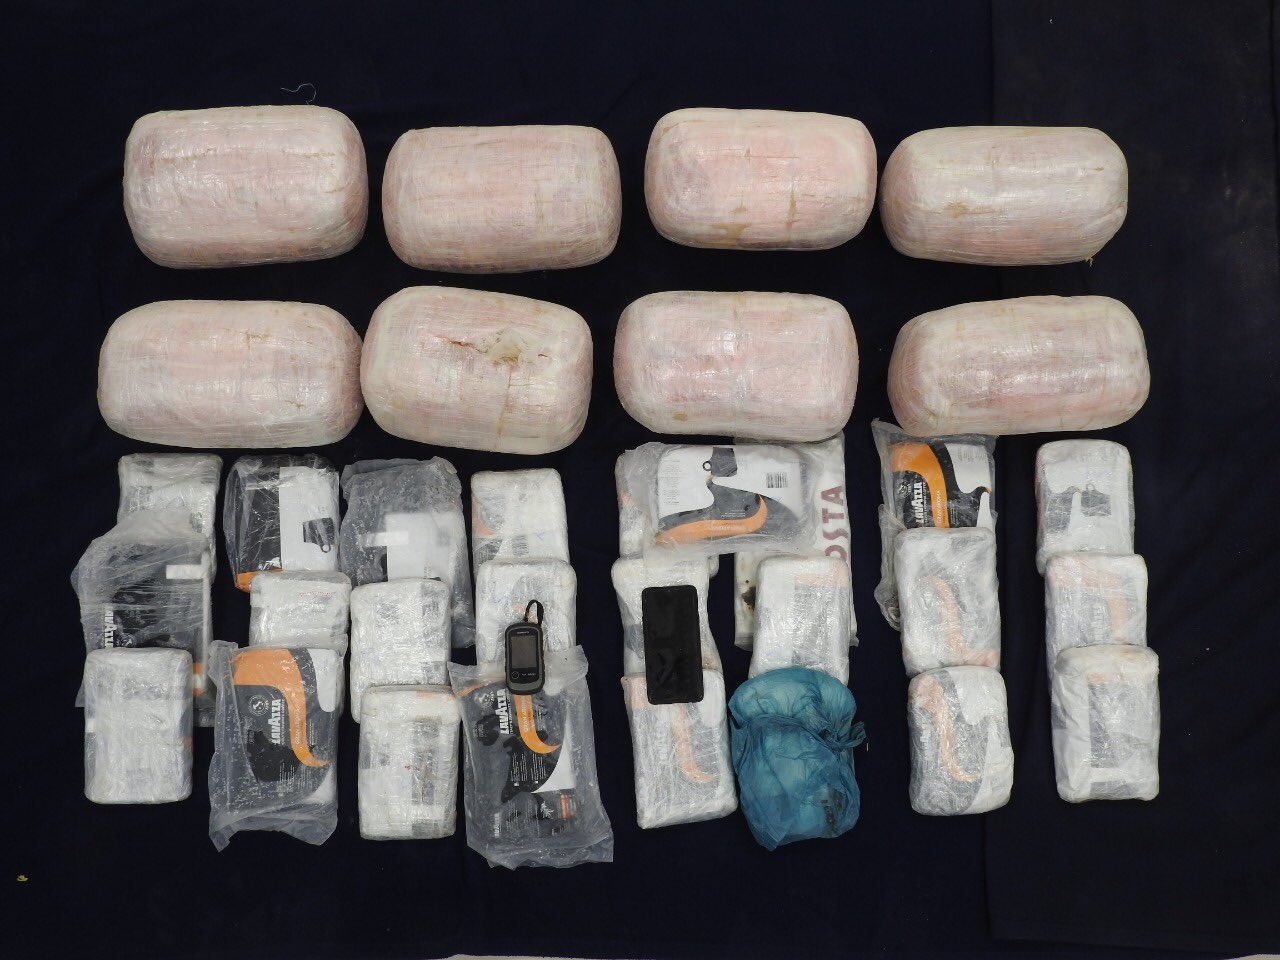 Six foreigners arrested attempting to smuggle drugs into Oman